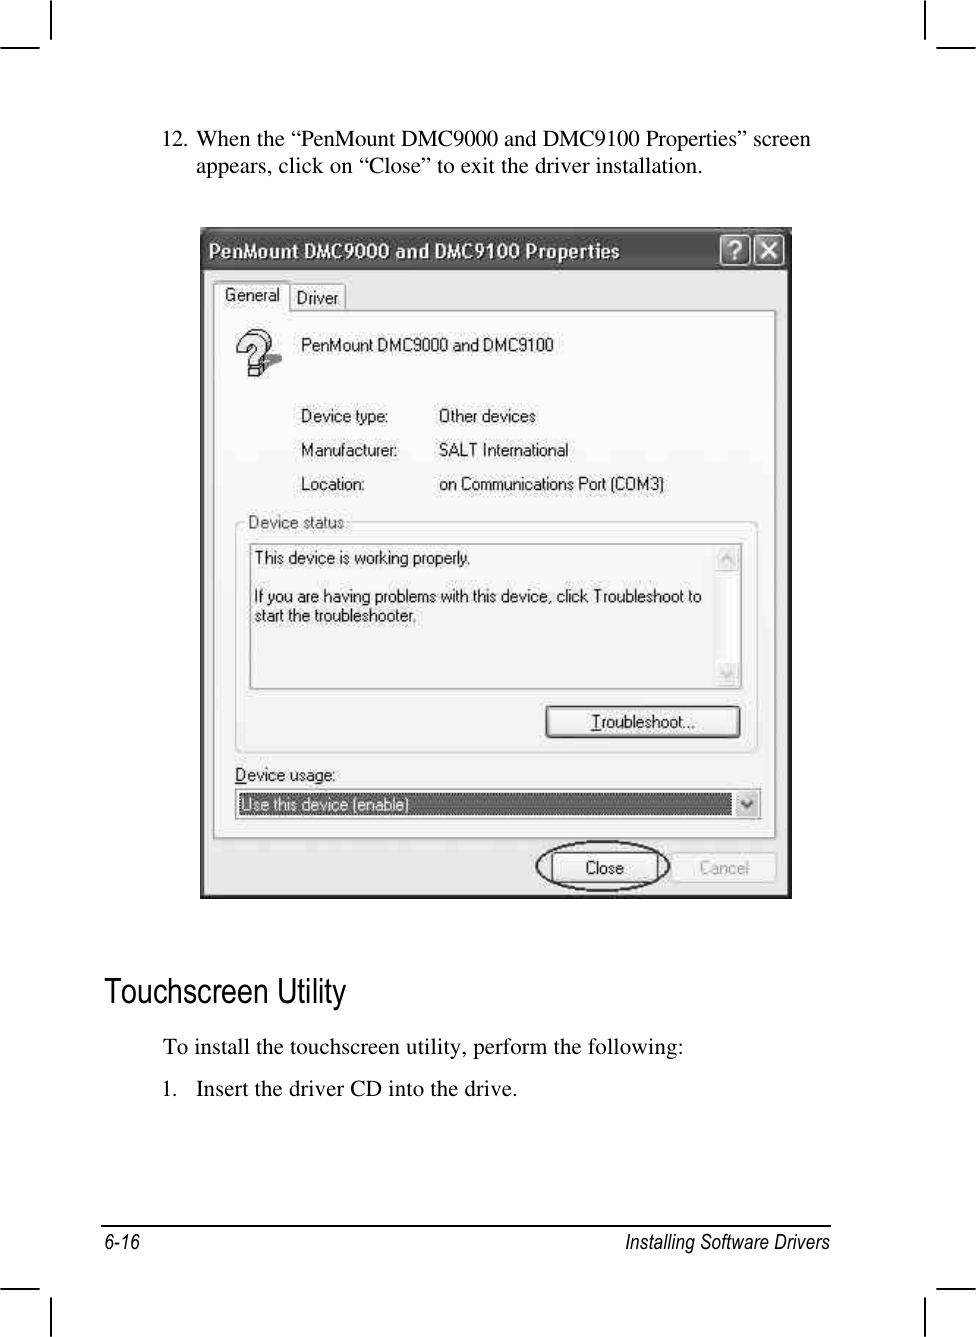 6-16 Installing Software Drivers12. When the “PenMount DMC9000 and DMC9100 Properties” screenappears, click on “Close” to exit the driver installation.Touchscreen UtilityTo install the touchscreen utility, perform the following:1. Insert the driver CD into the drive.